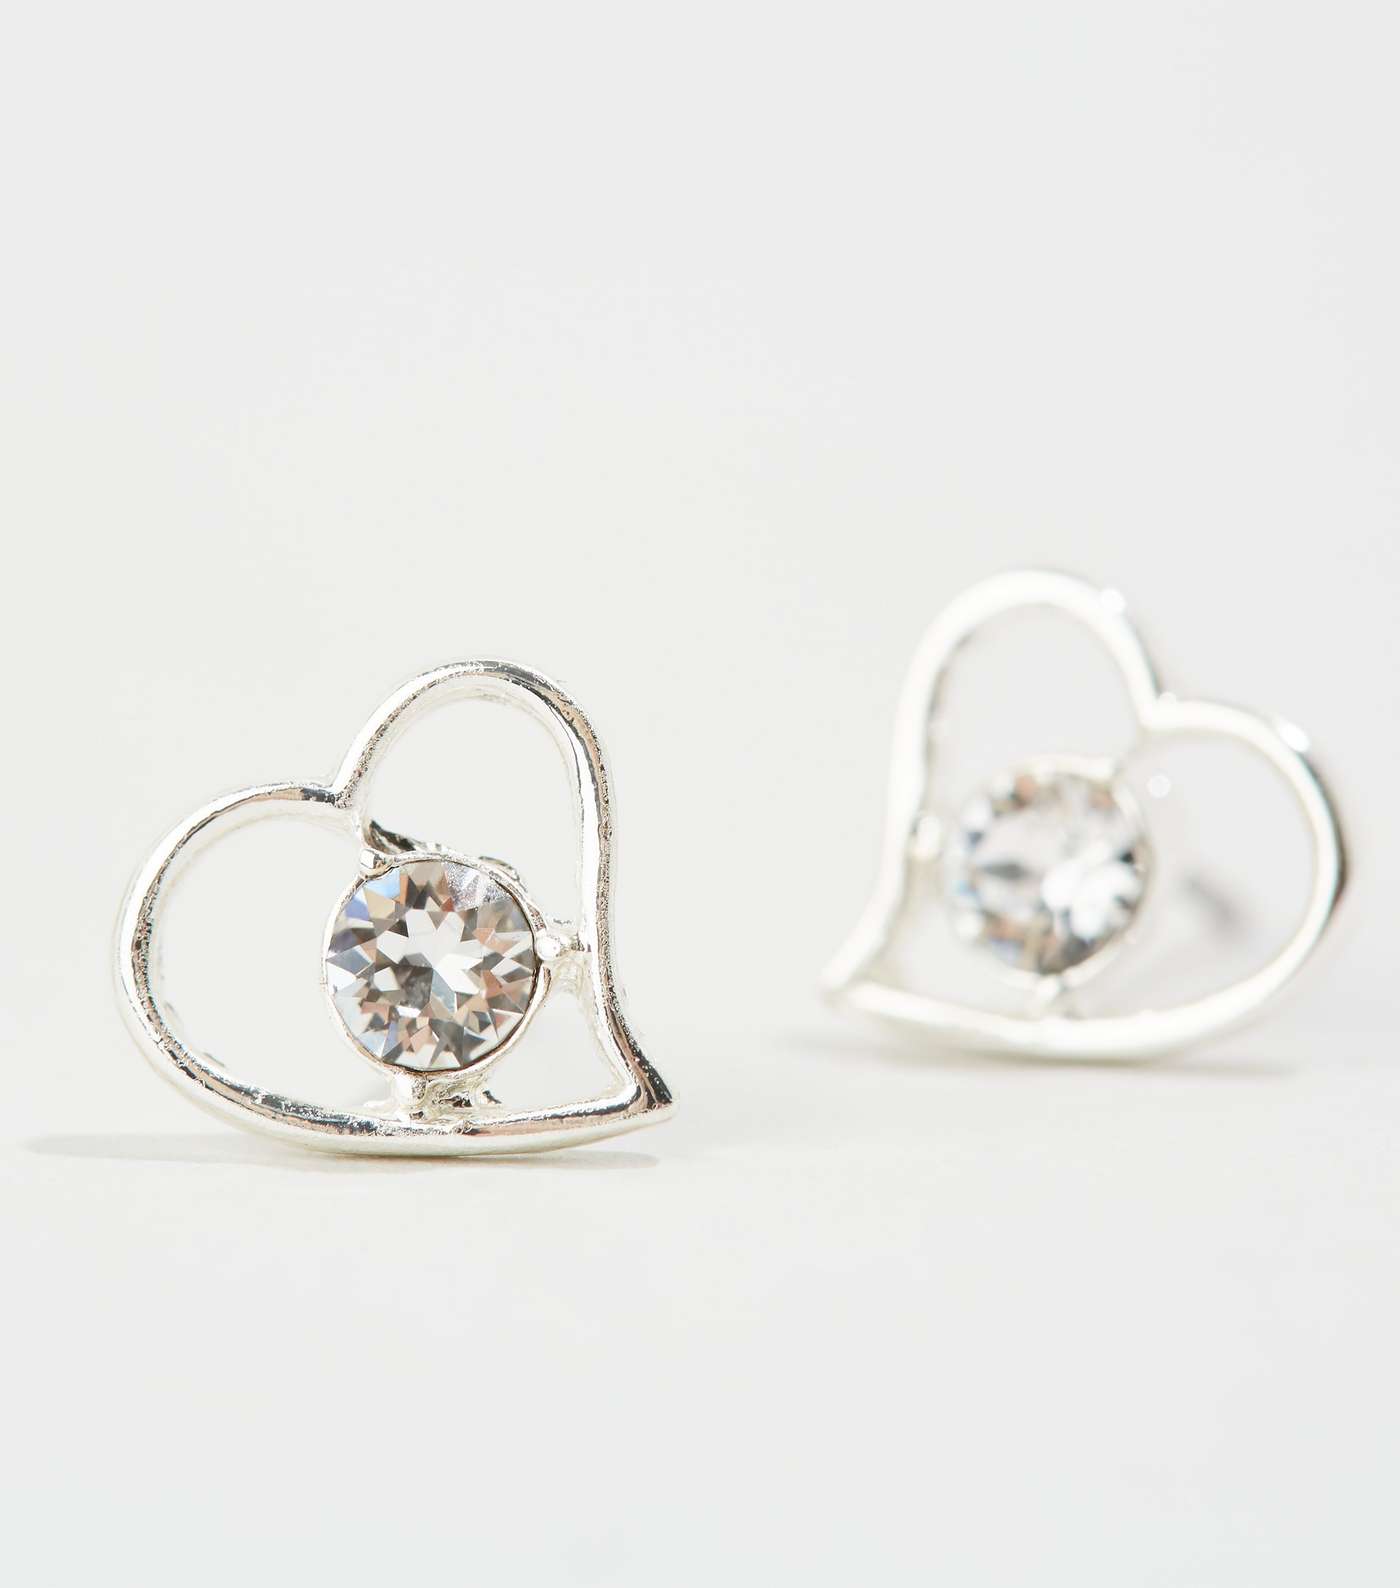 Silver Plated Heart Earrings with Crystals from Swarovski® Image 3